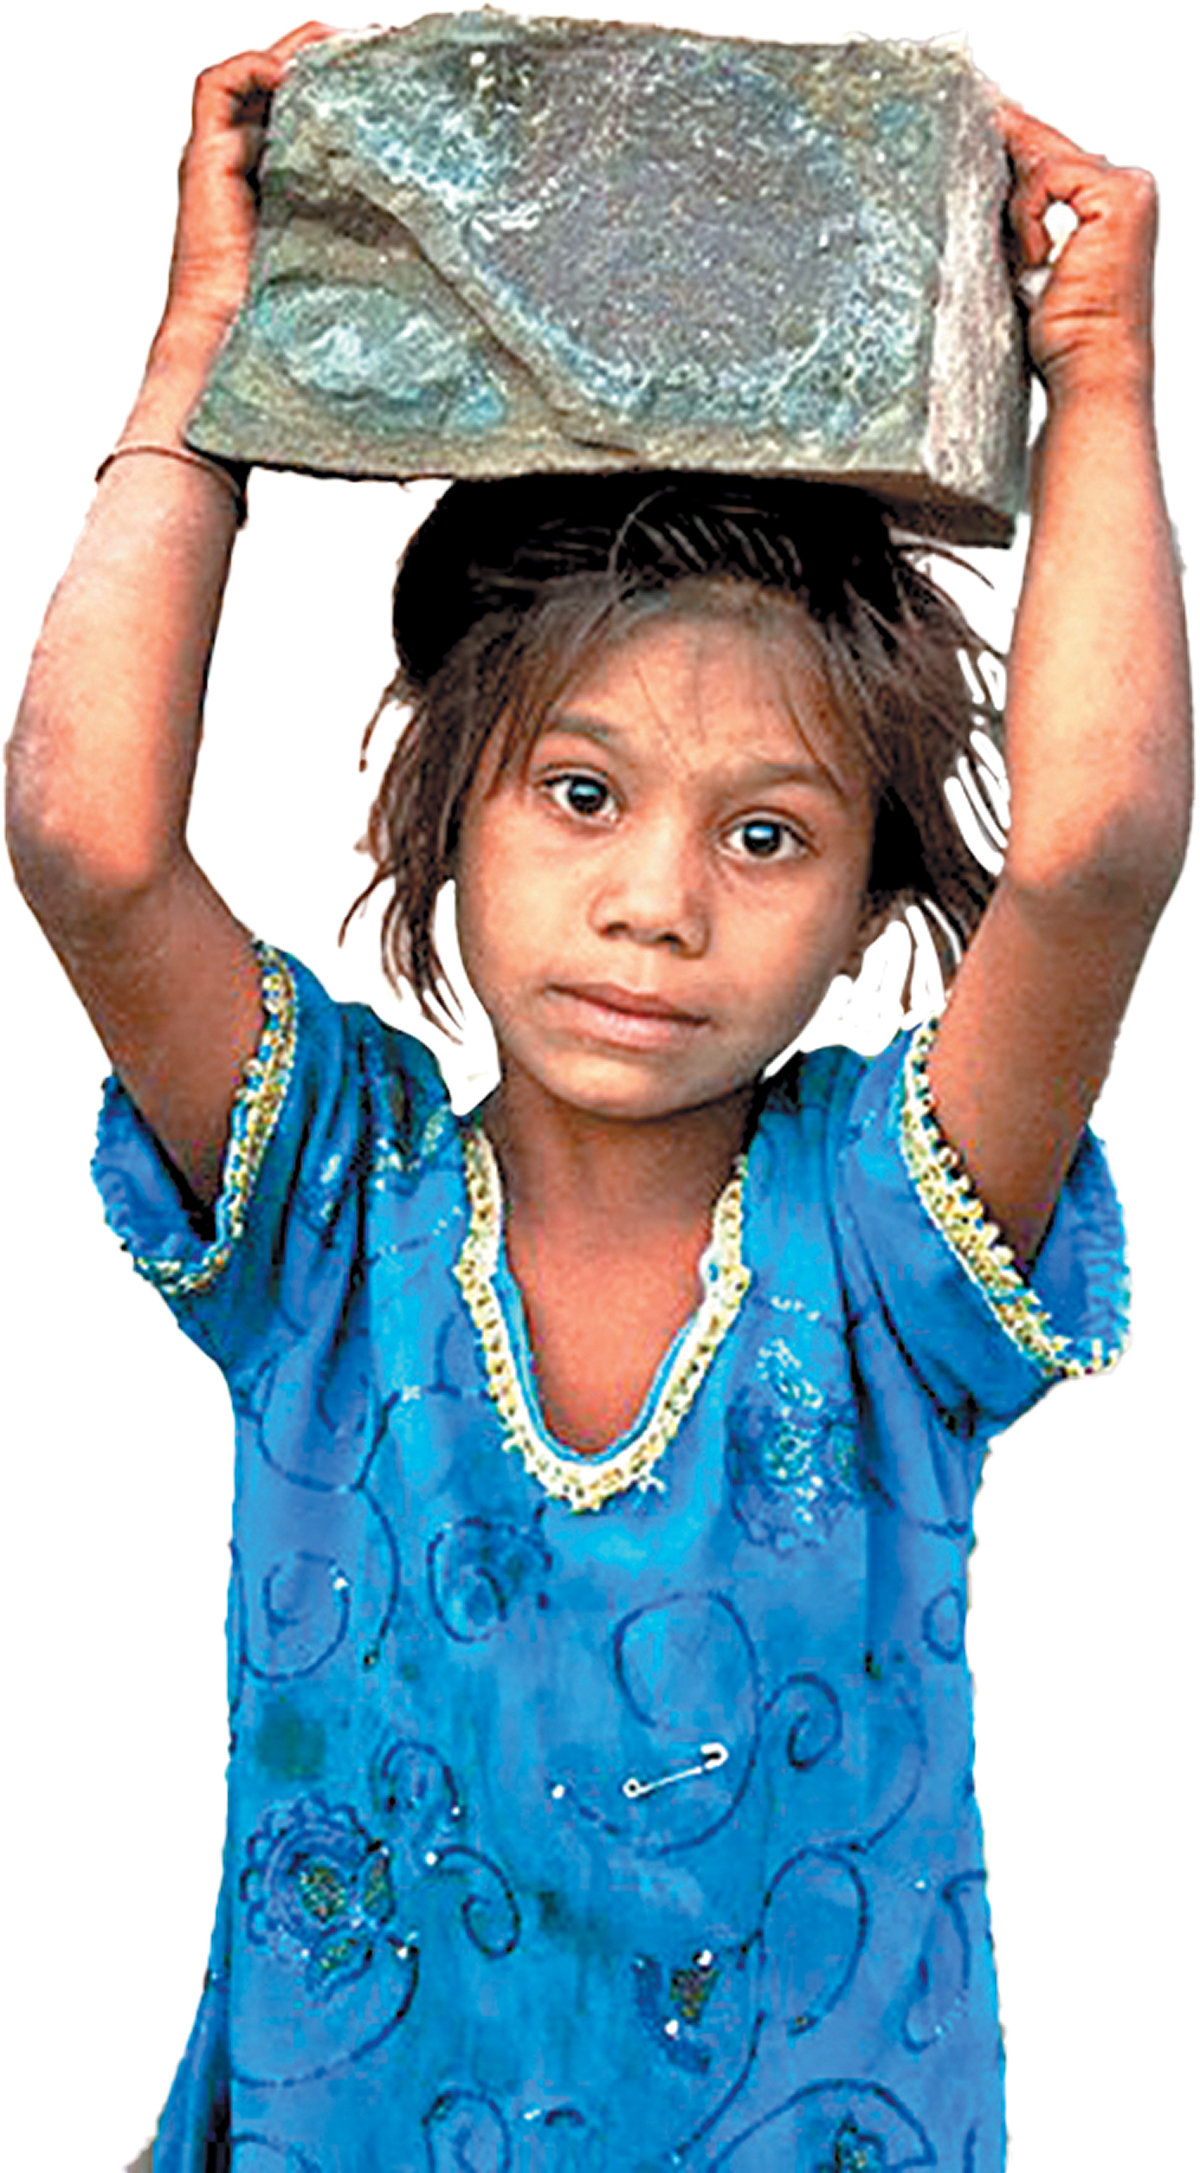 feature-child-labour-in-india_2 copy